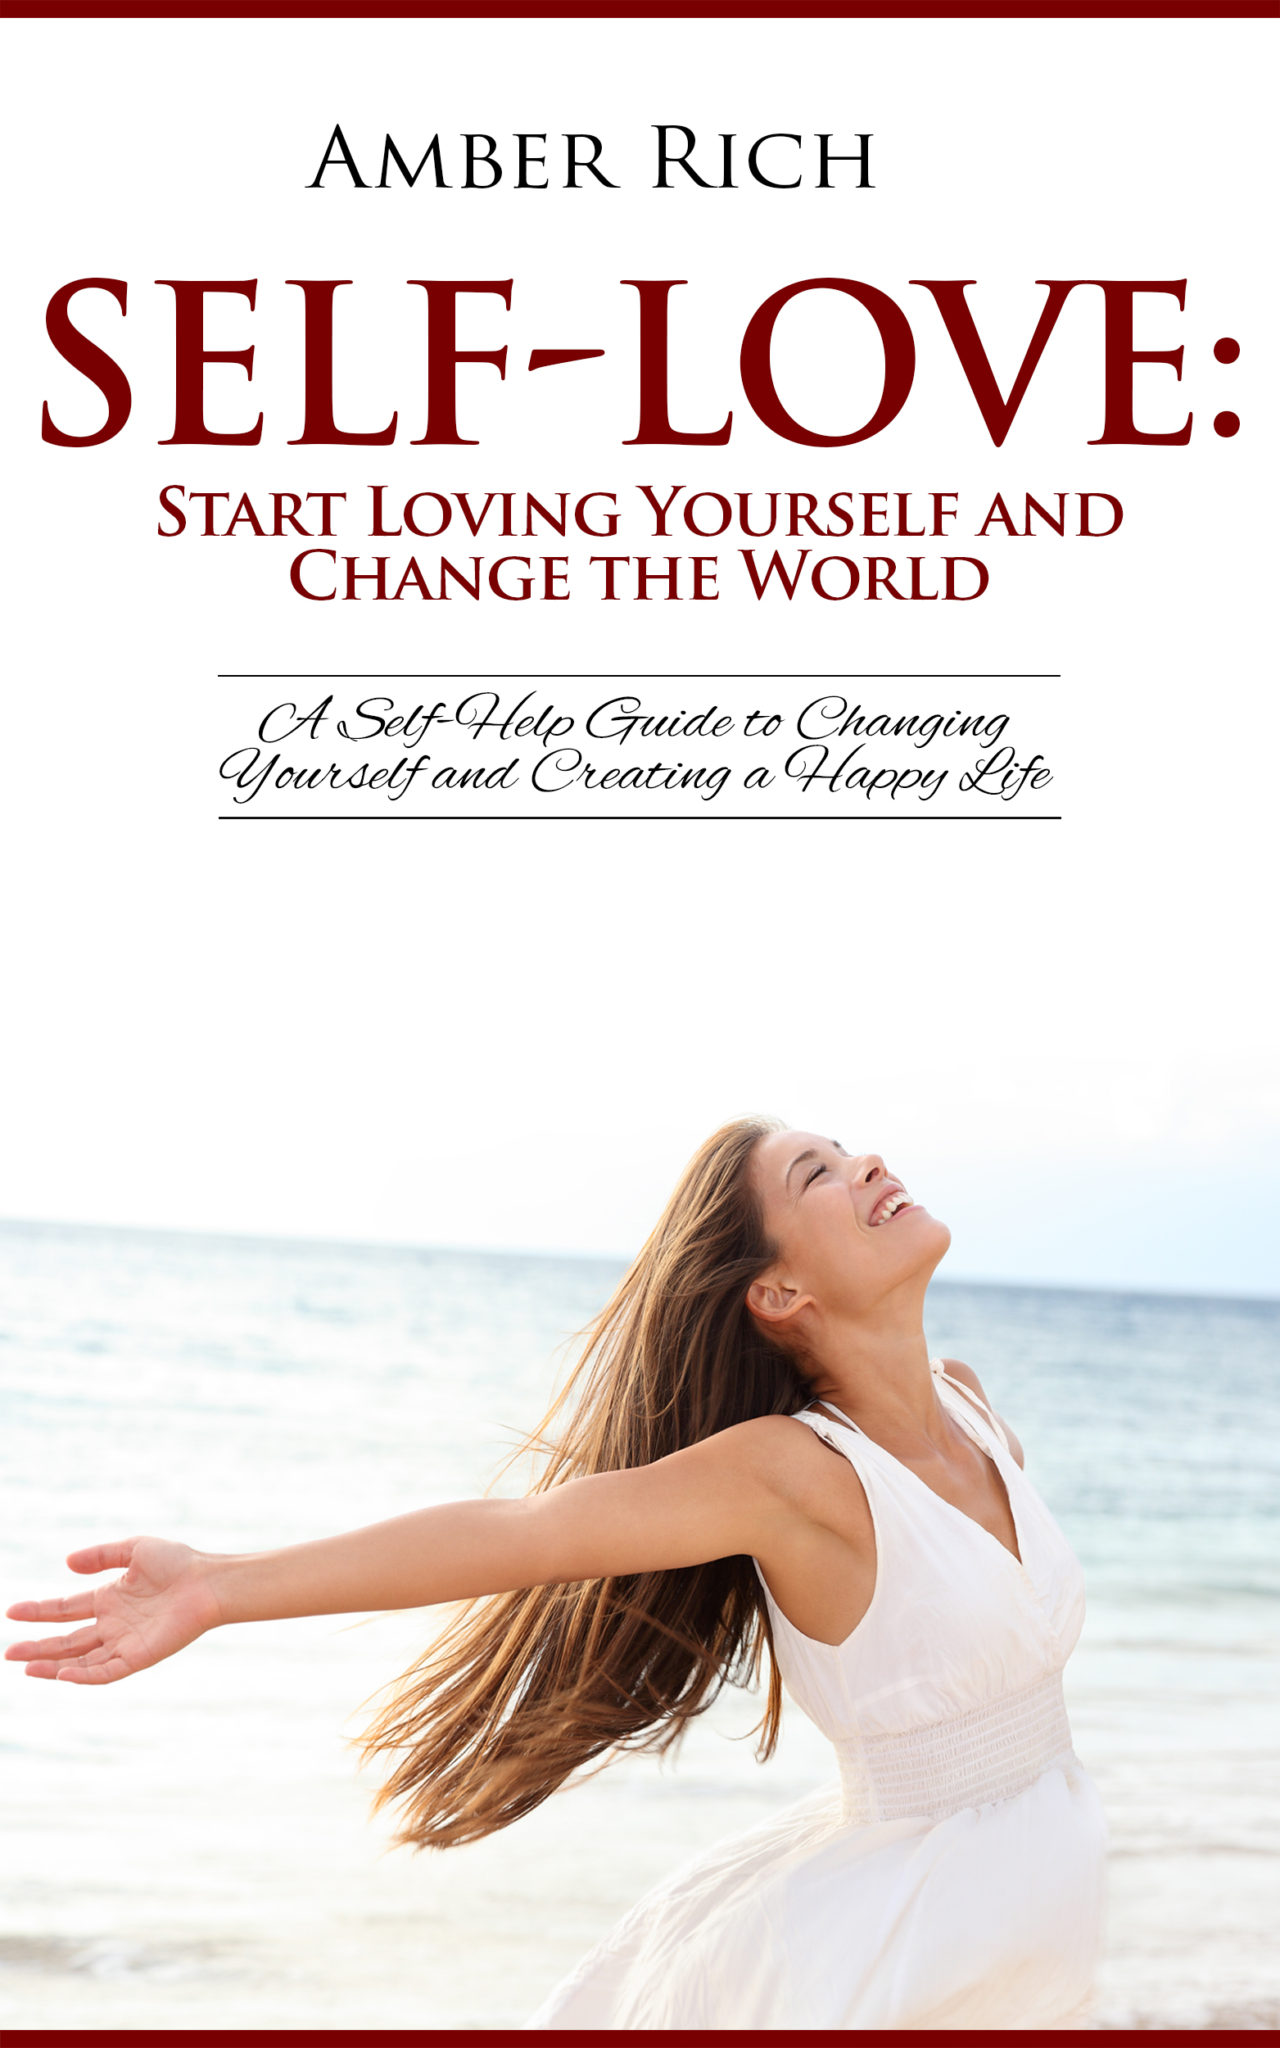 FREE: Self-Love: Start Loving Yourself and Change the World: A Self-Help Guide to Changing Yourself and Creating a Happy Life (Second Edition) by Amber Rich